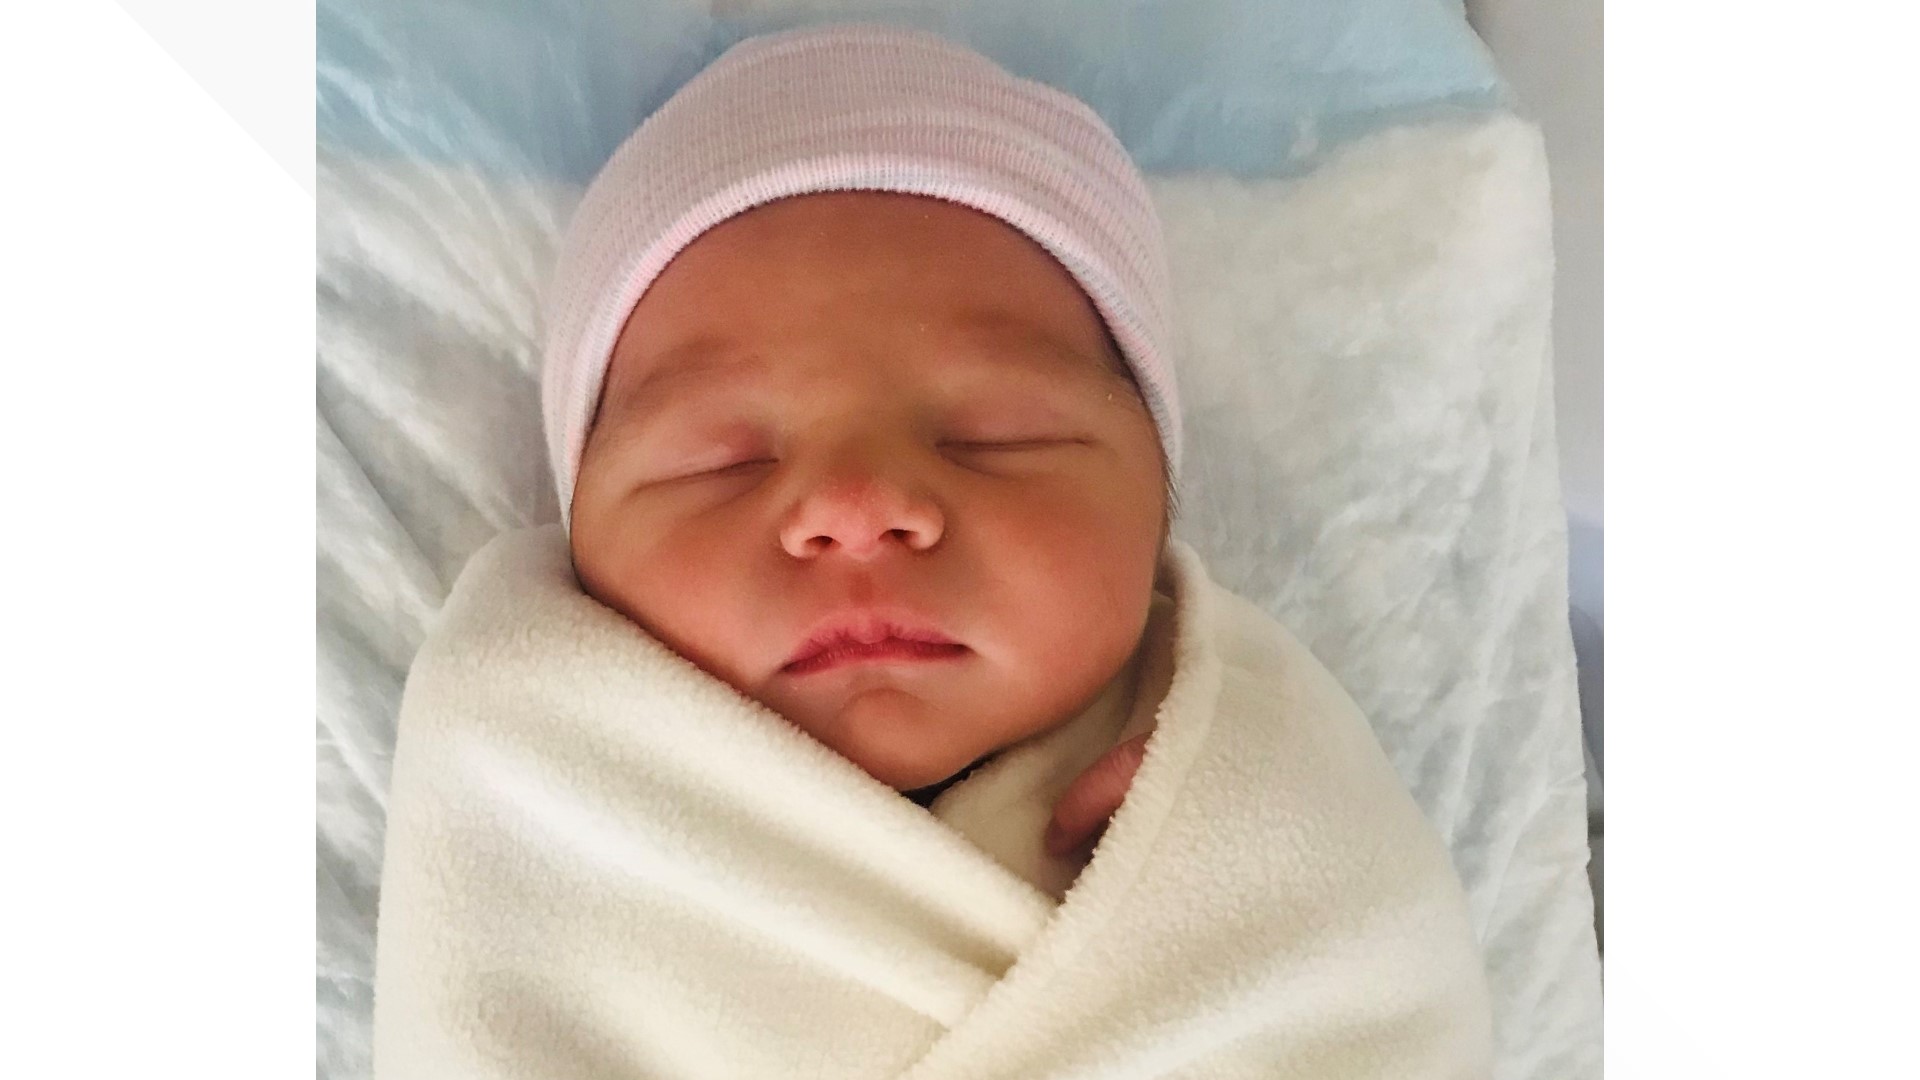 KARE 11 Sunrise's Alicia Lewis and her husband Nico have welcomed their first child, a baby boy named Rémi Michael Rioux!